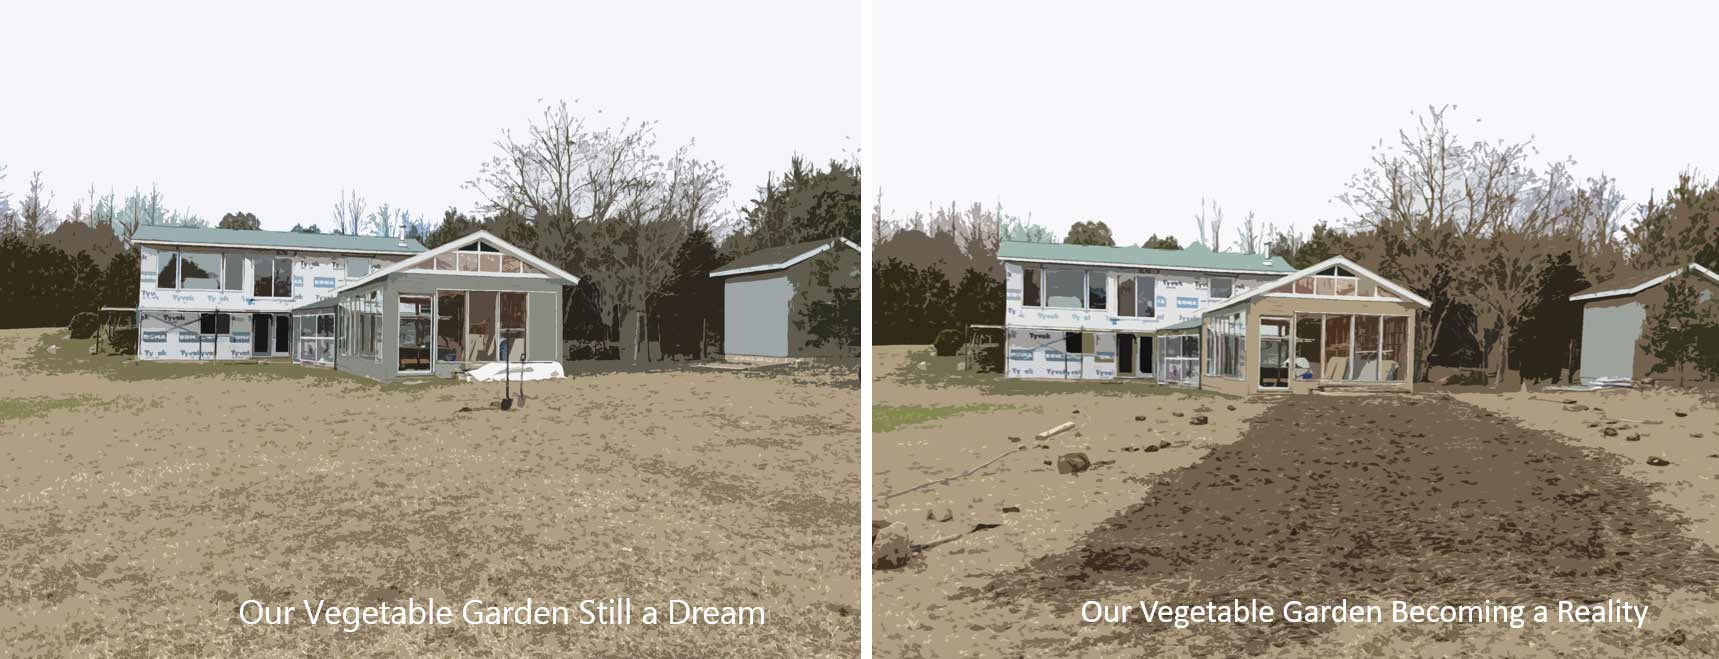 A before and after comparison of the plot of land in front of the greenhouse.